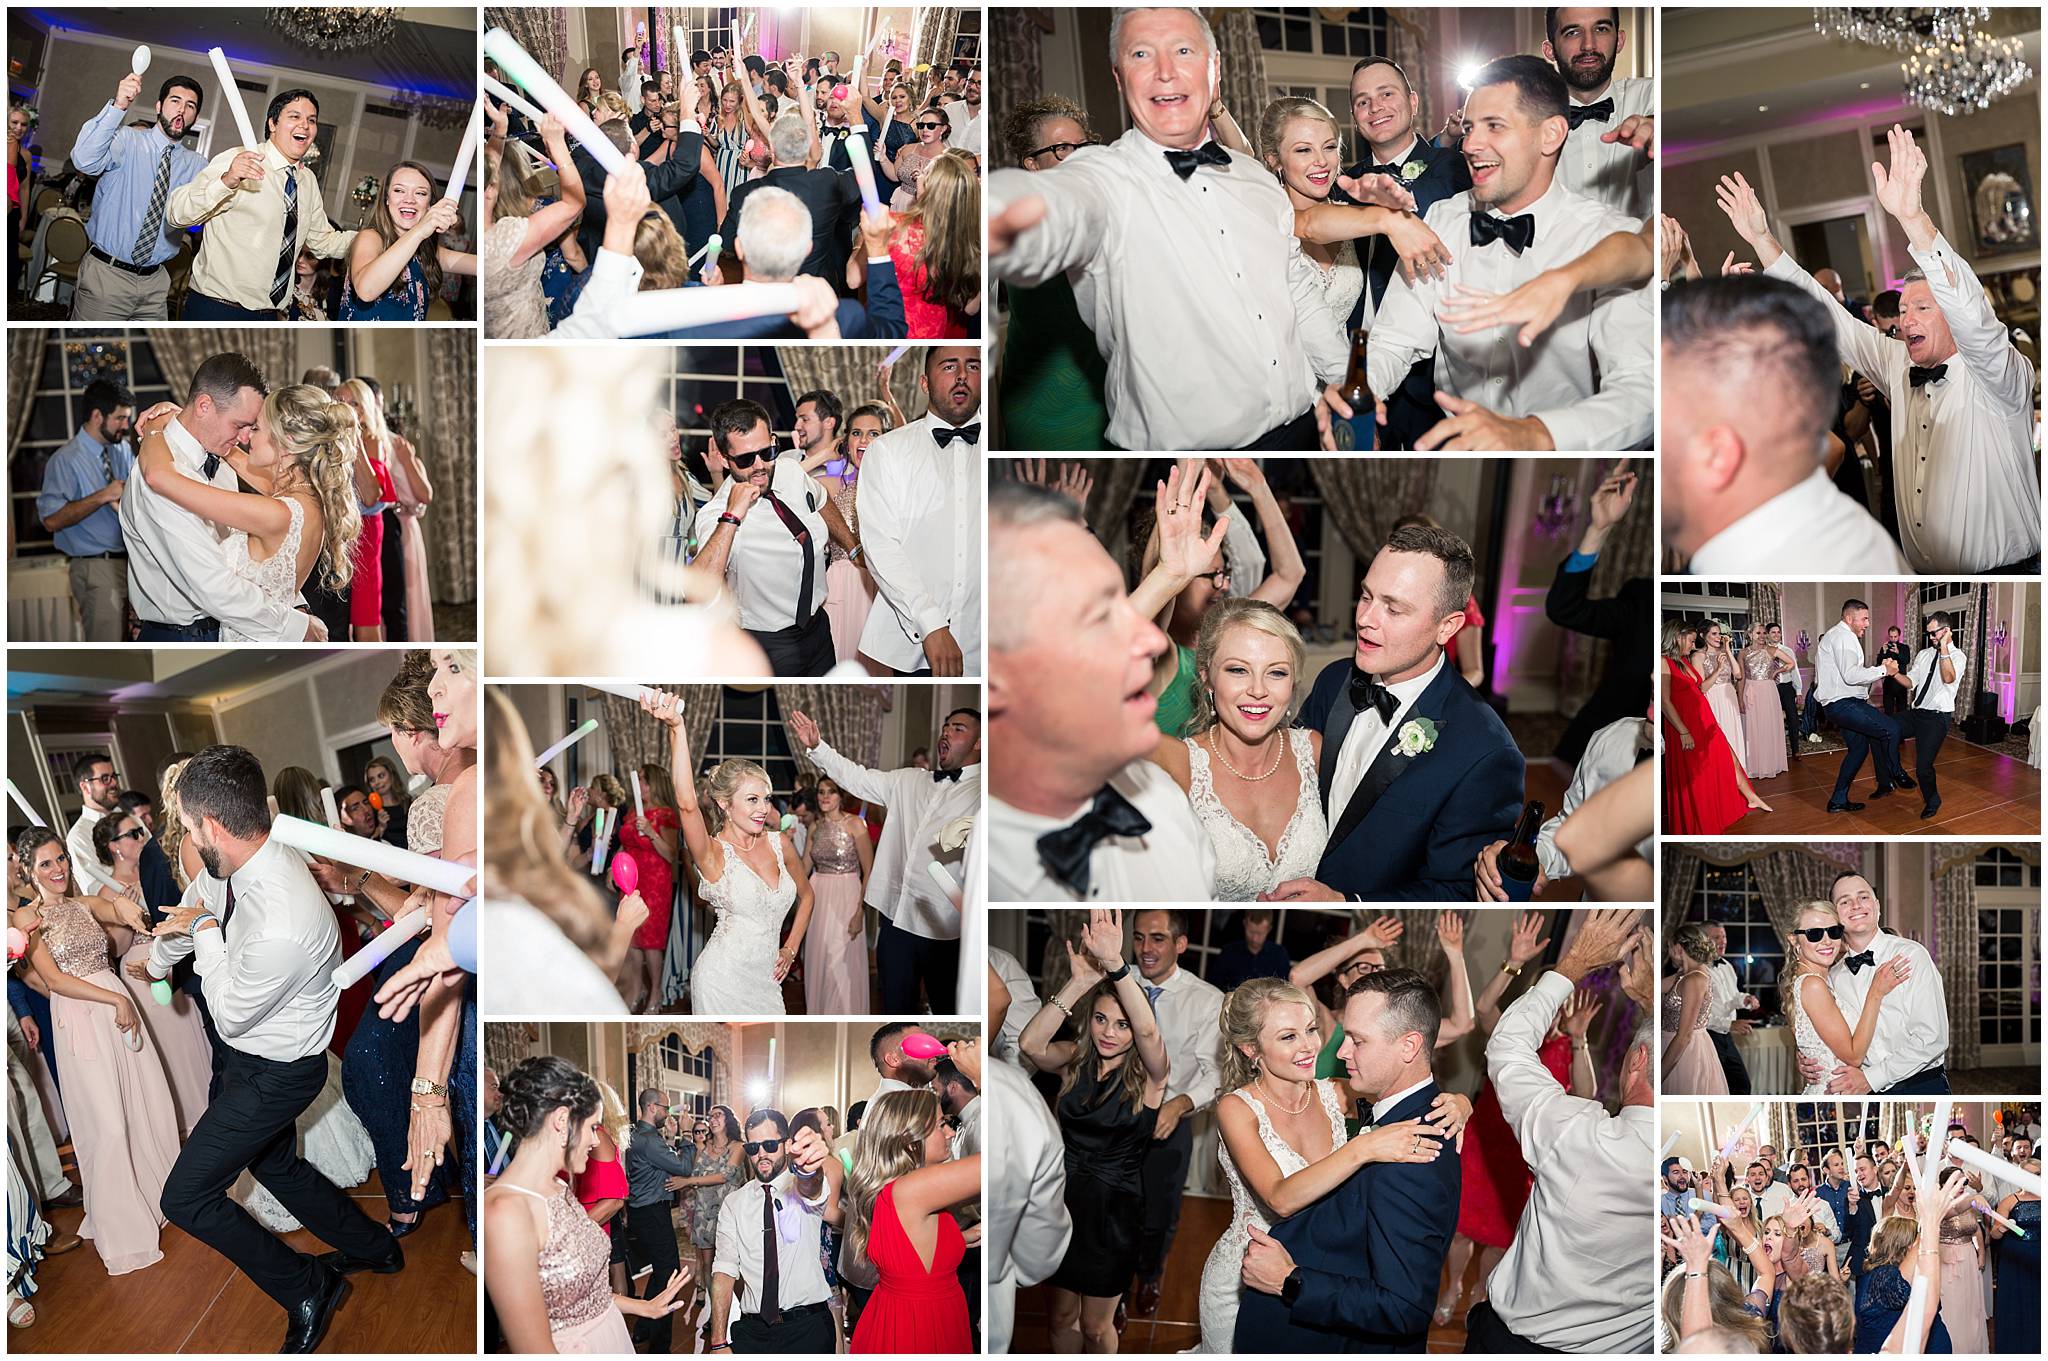 st. ives country club wedding reception photos pictures 